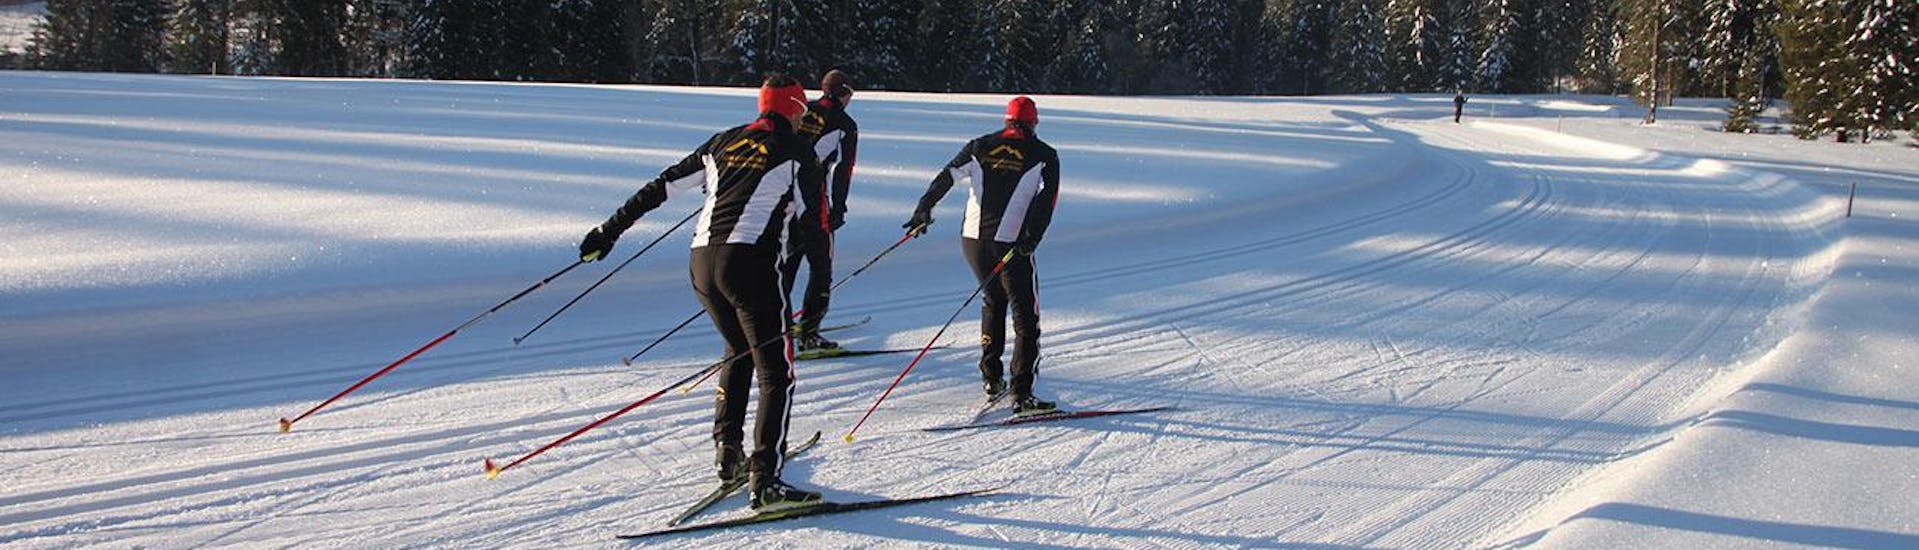 Three winter sports enthusiasts attend the private cross-country skiing lessons for all levels - skating at the Schneesportschule Balderschwang